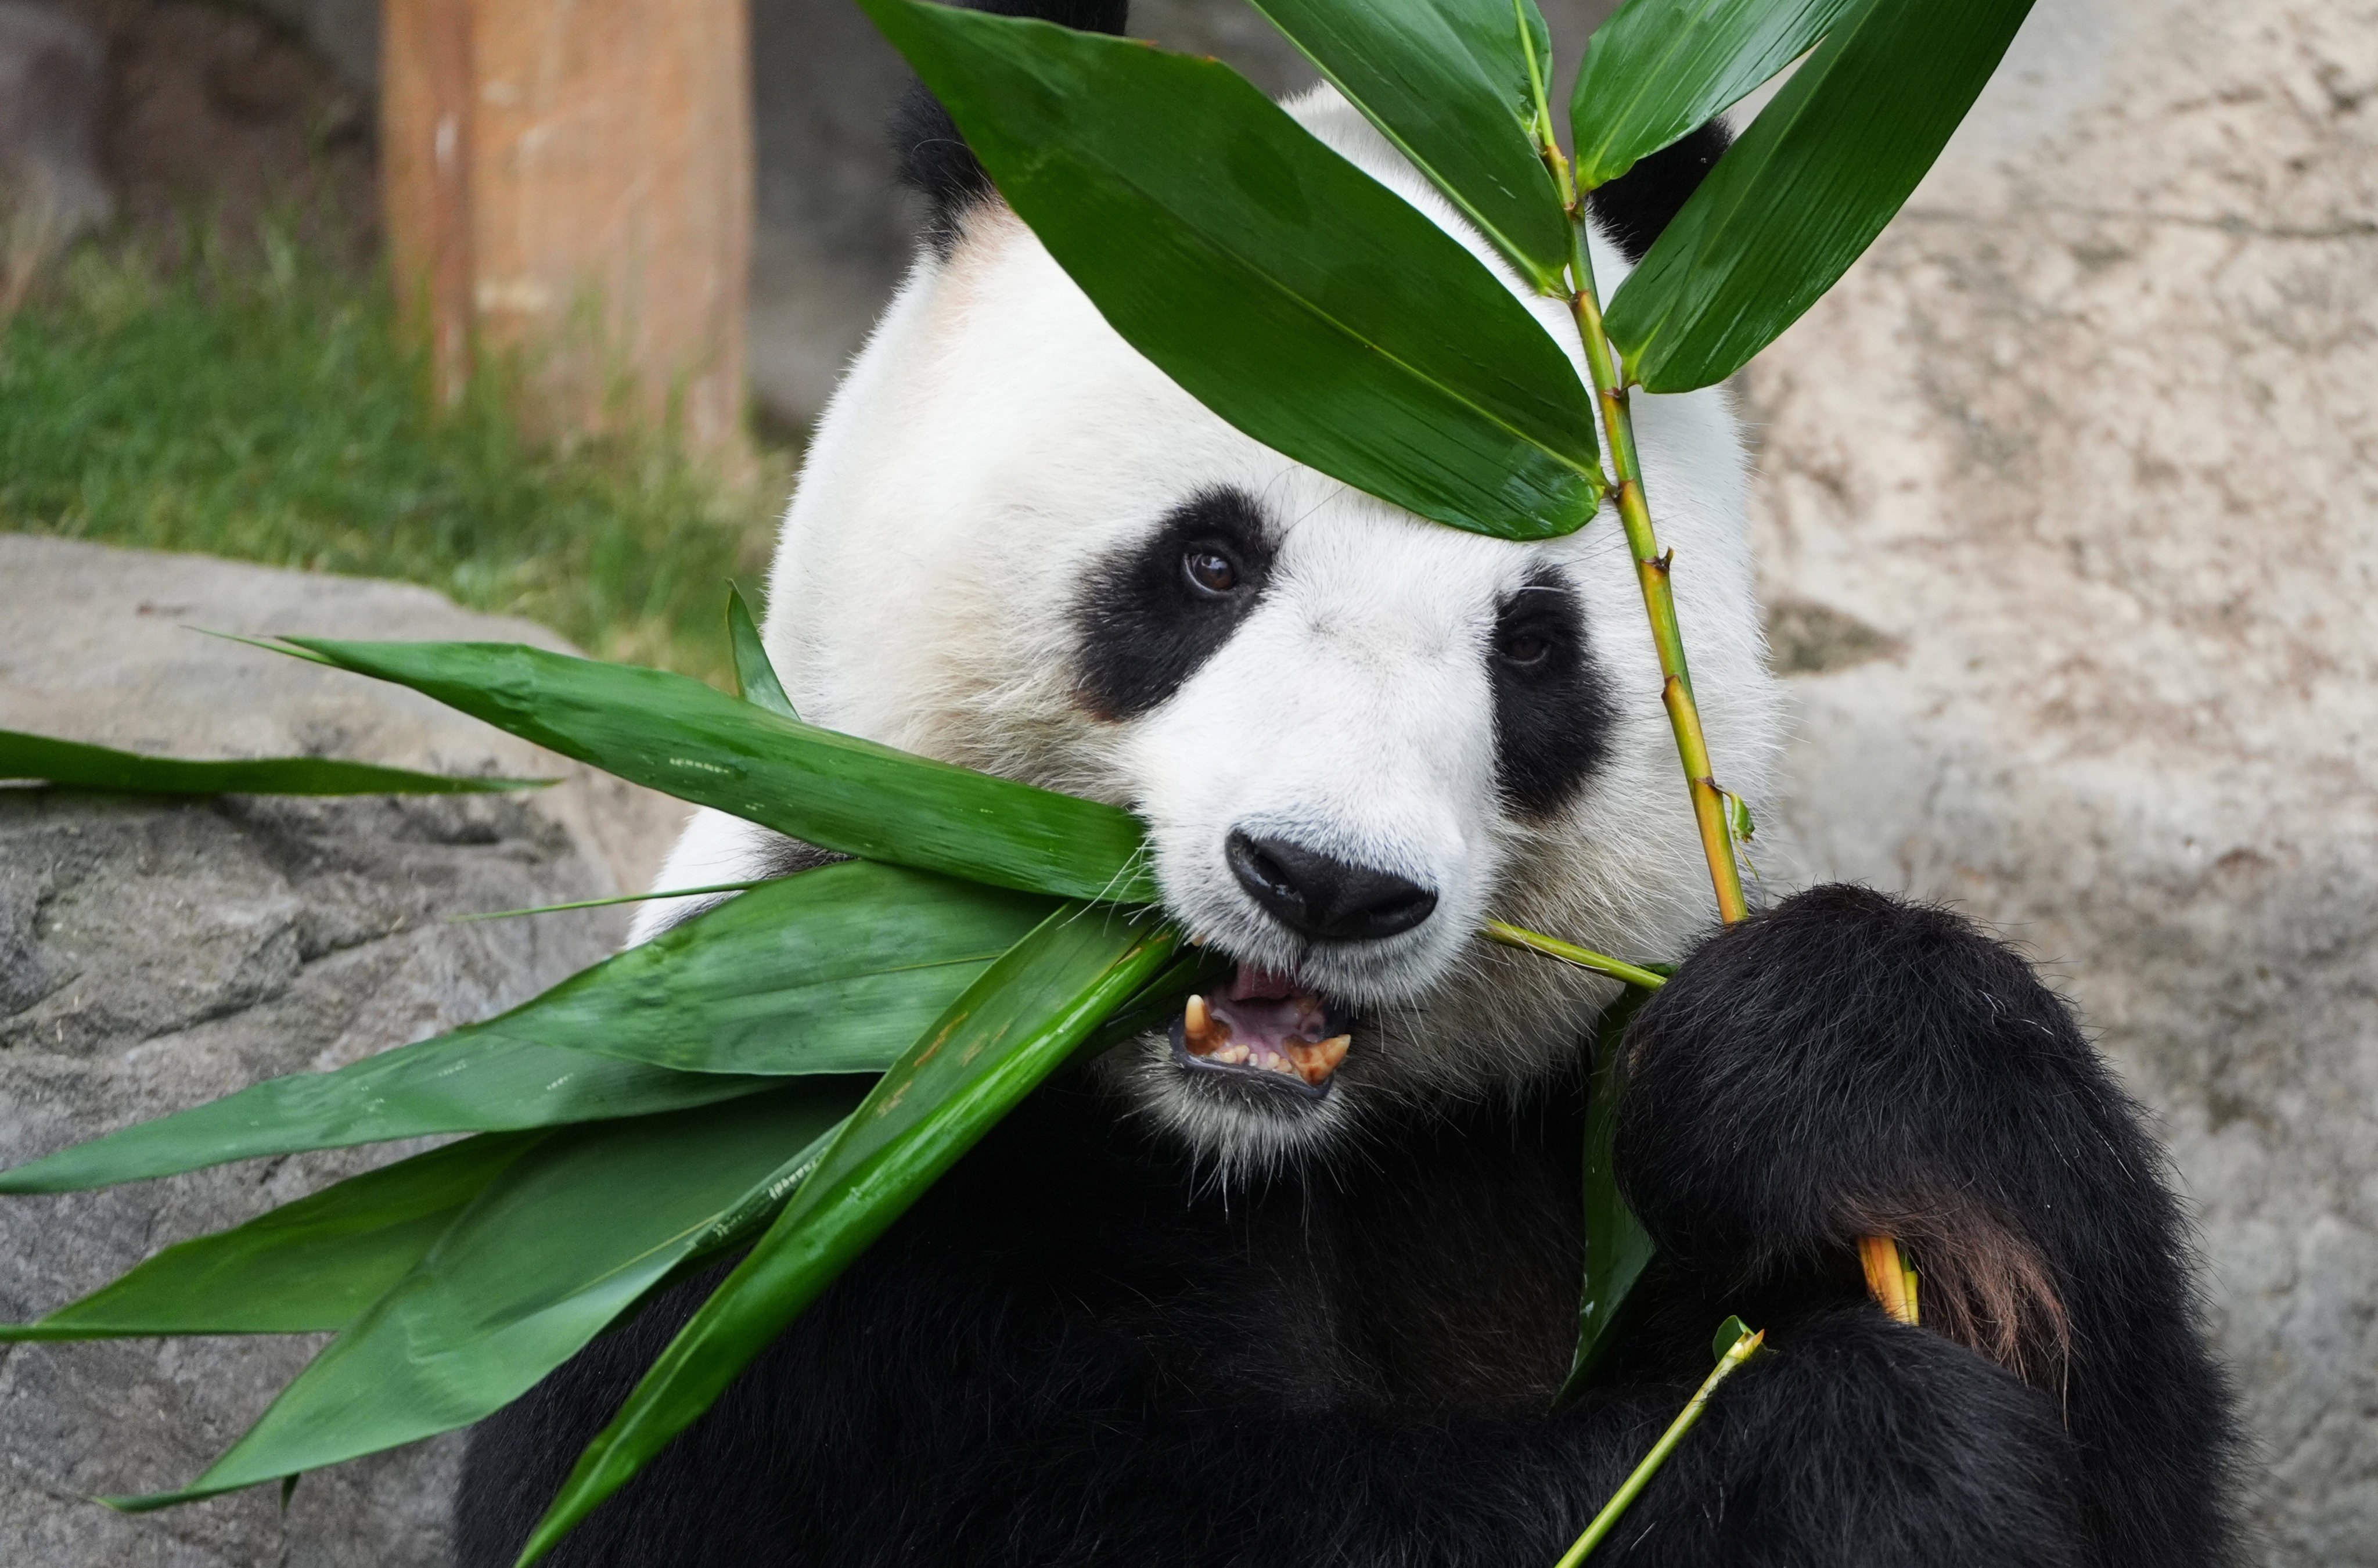 Le Le was one of two giant pandas gifted to Hong Kong in 2007. Photo: Eugene Lee